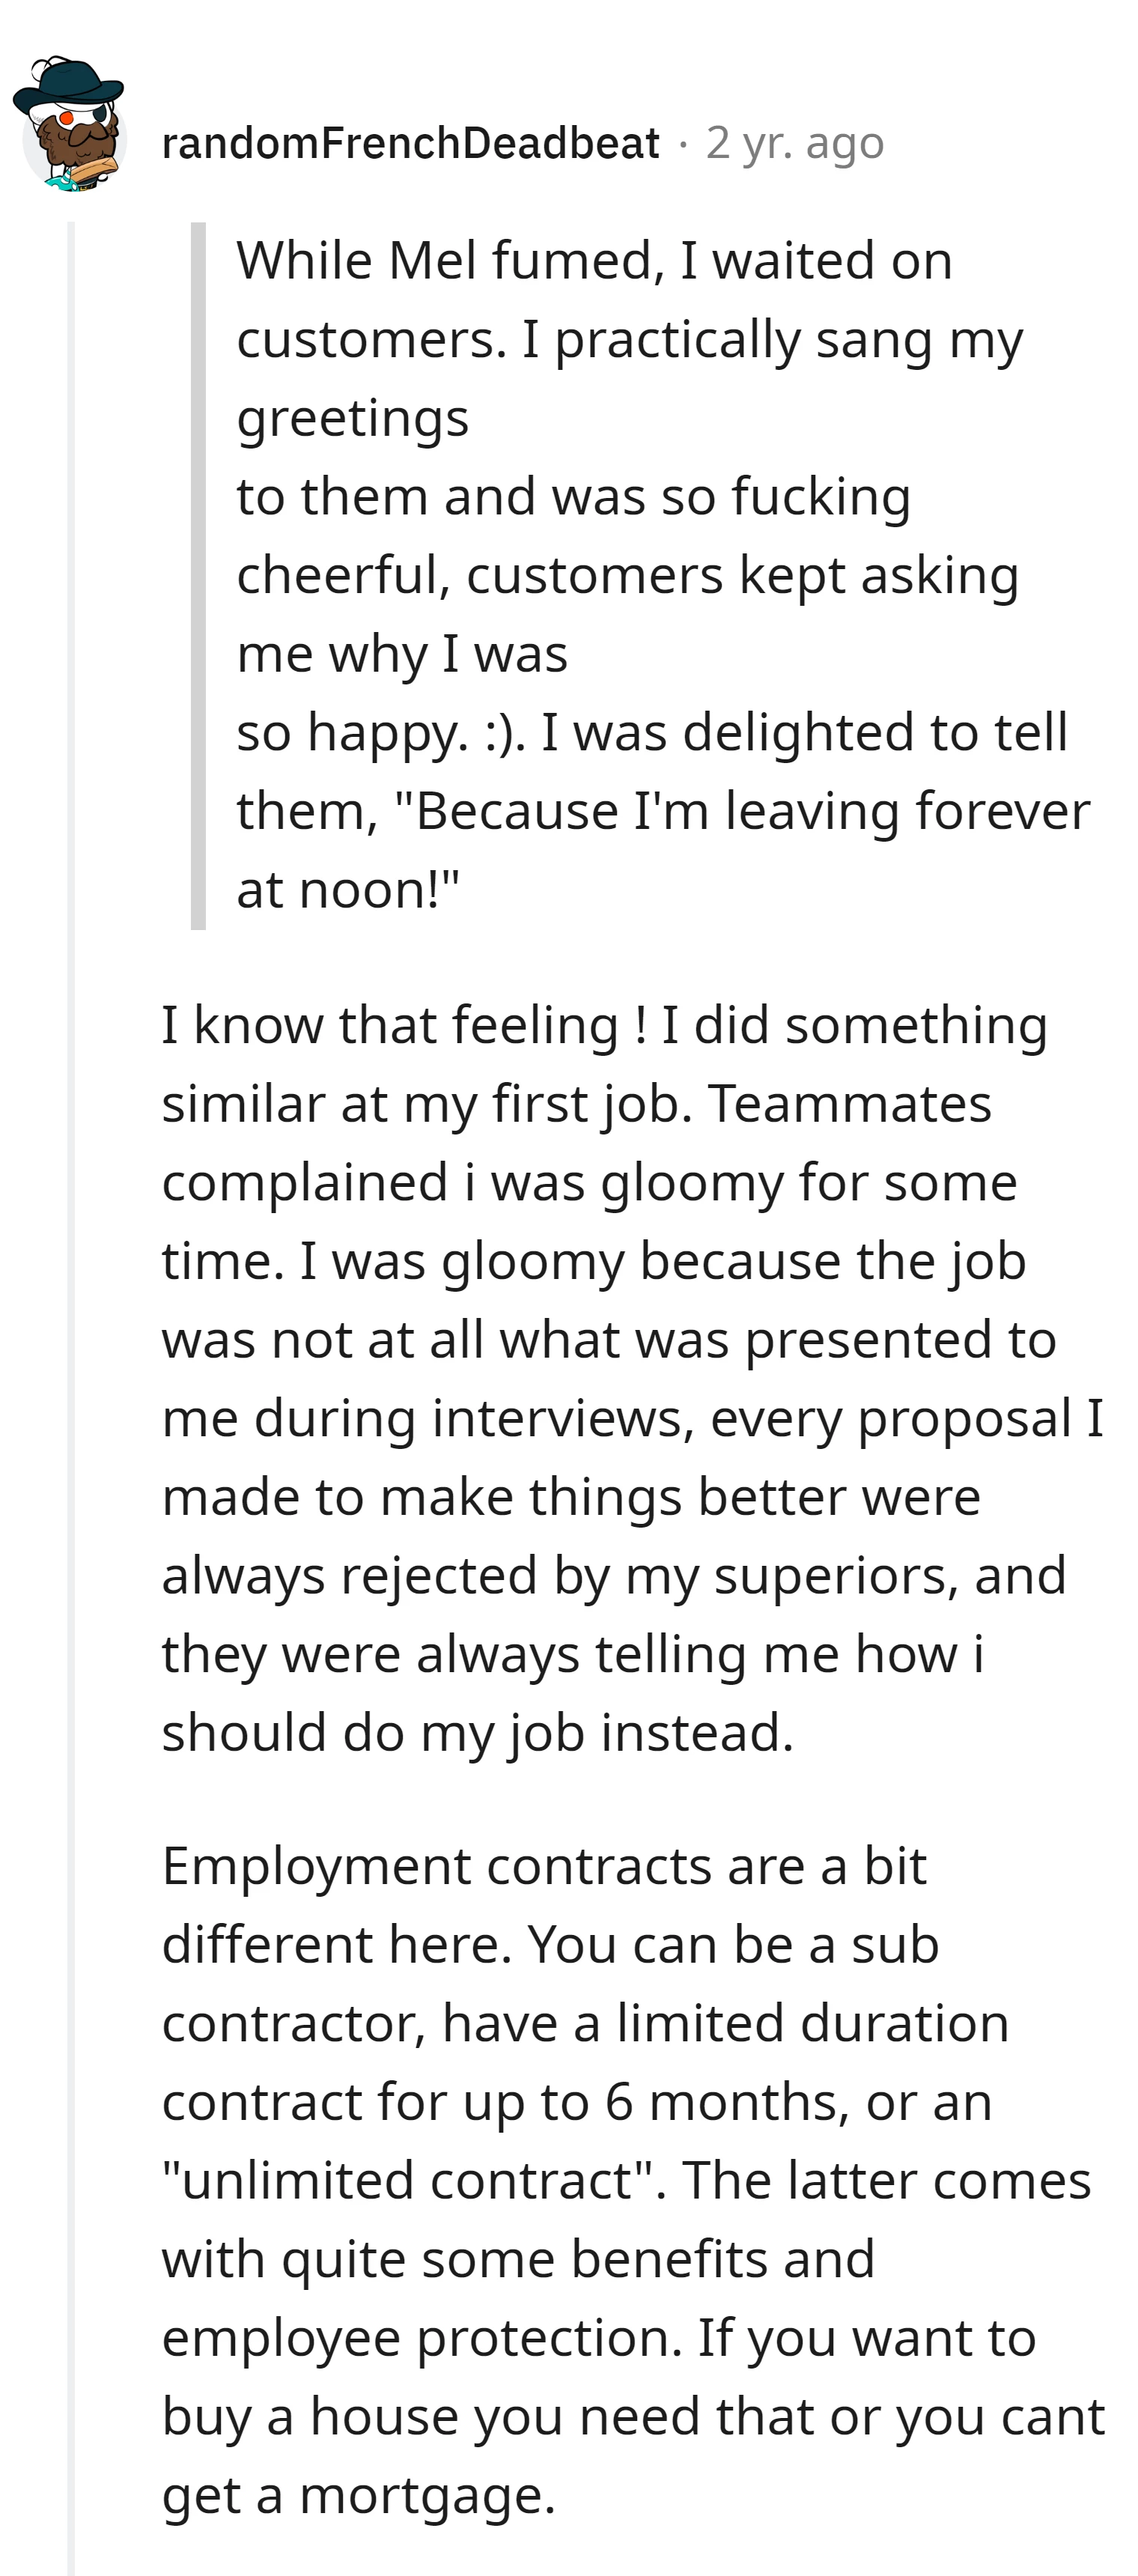 The commenter shares a relatable experience of resigning from a job where promises weren't kept,